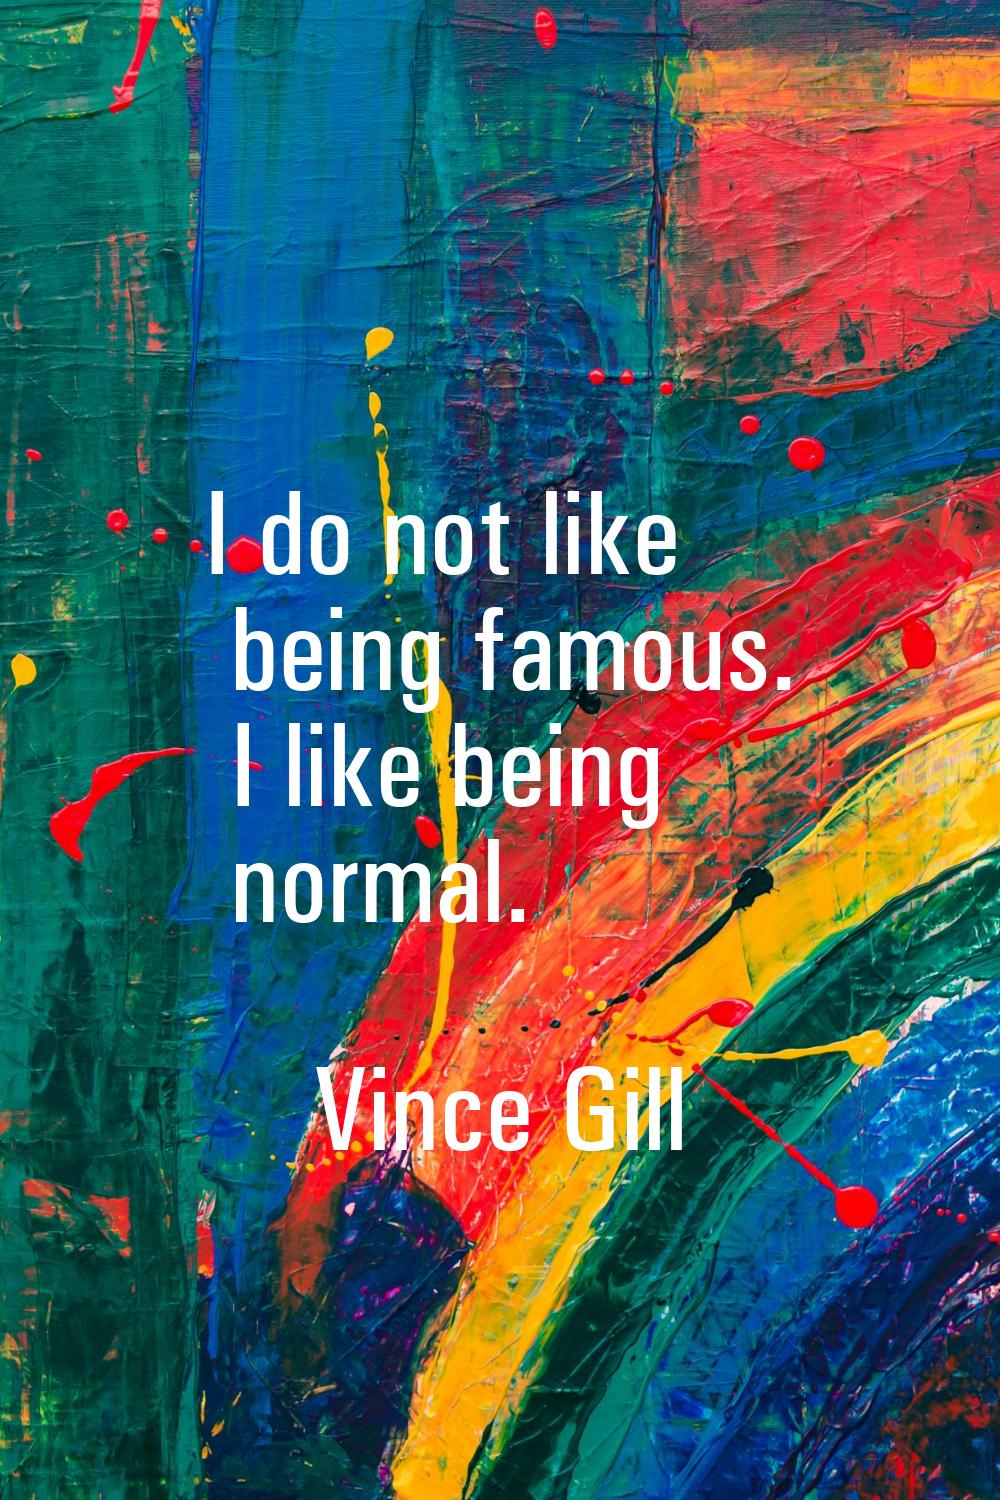 I do not like being famous. I like being normal.